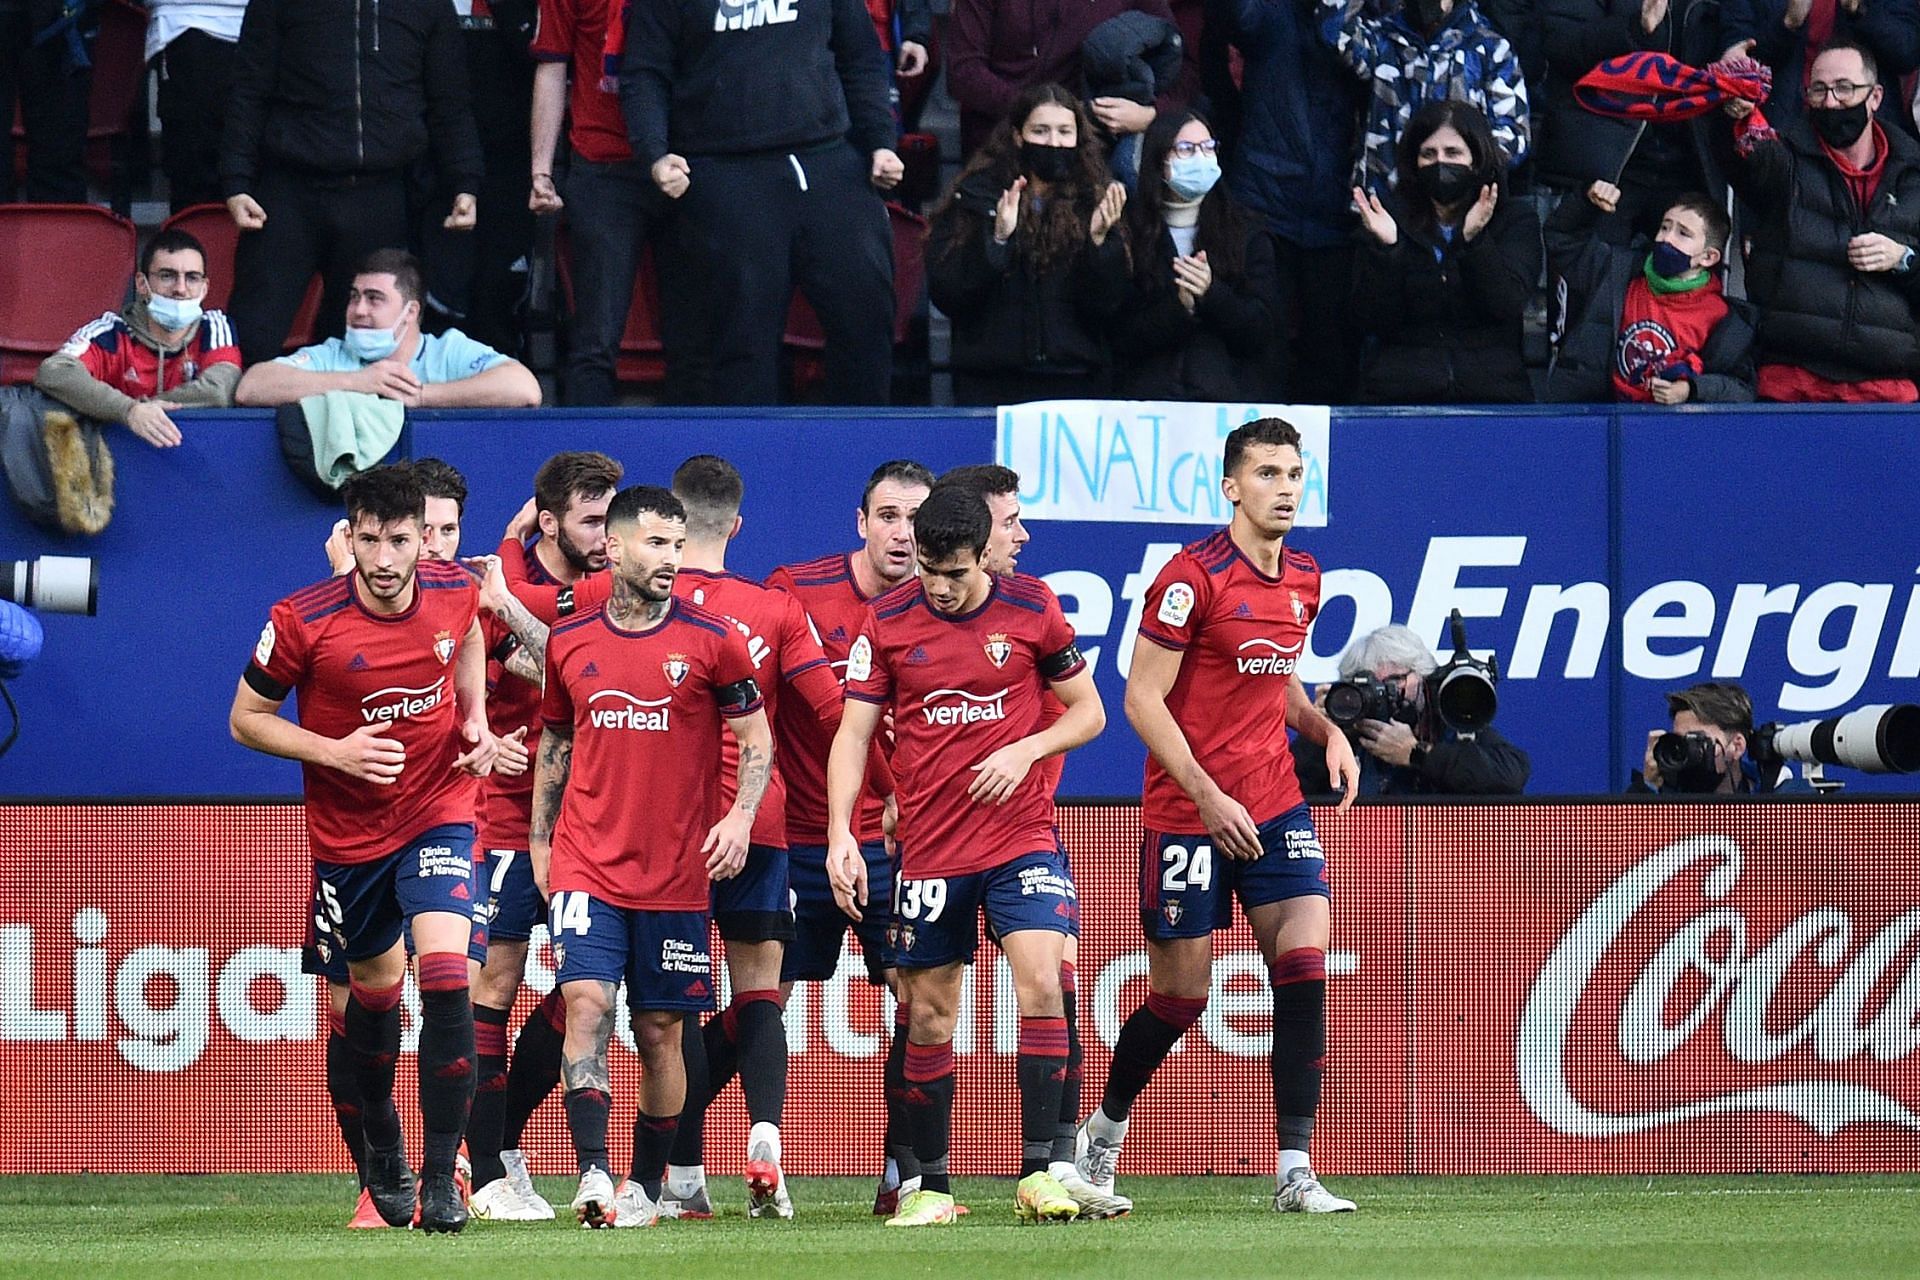 Osasuna are looking to climb up the table